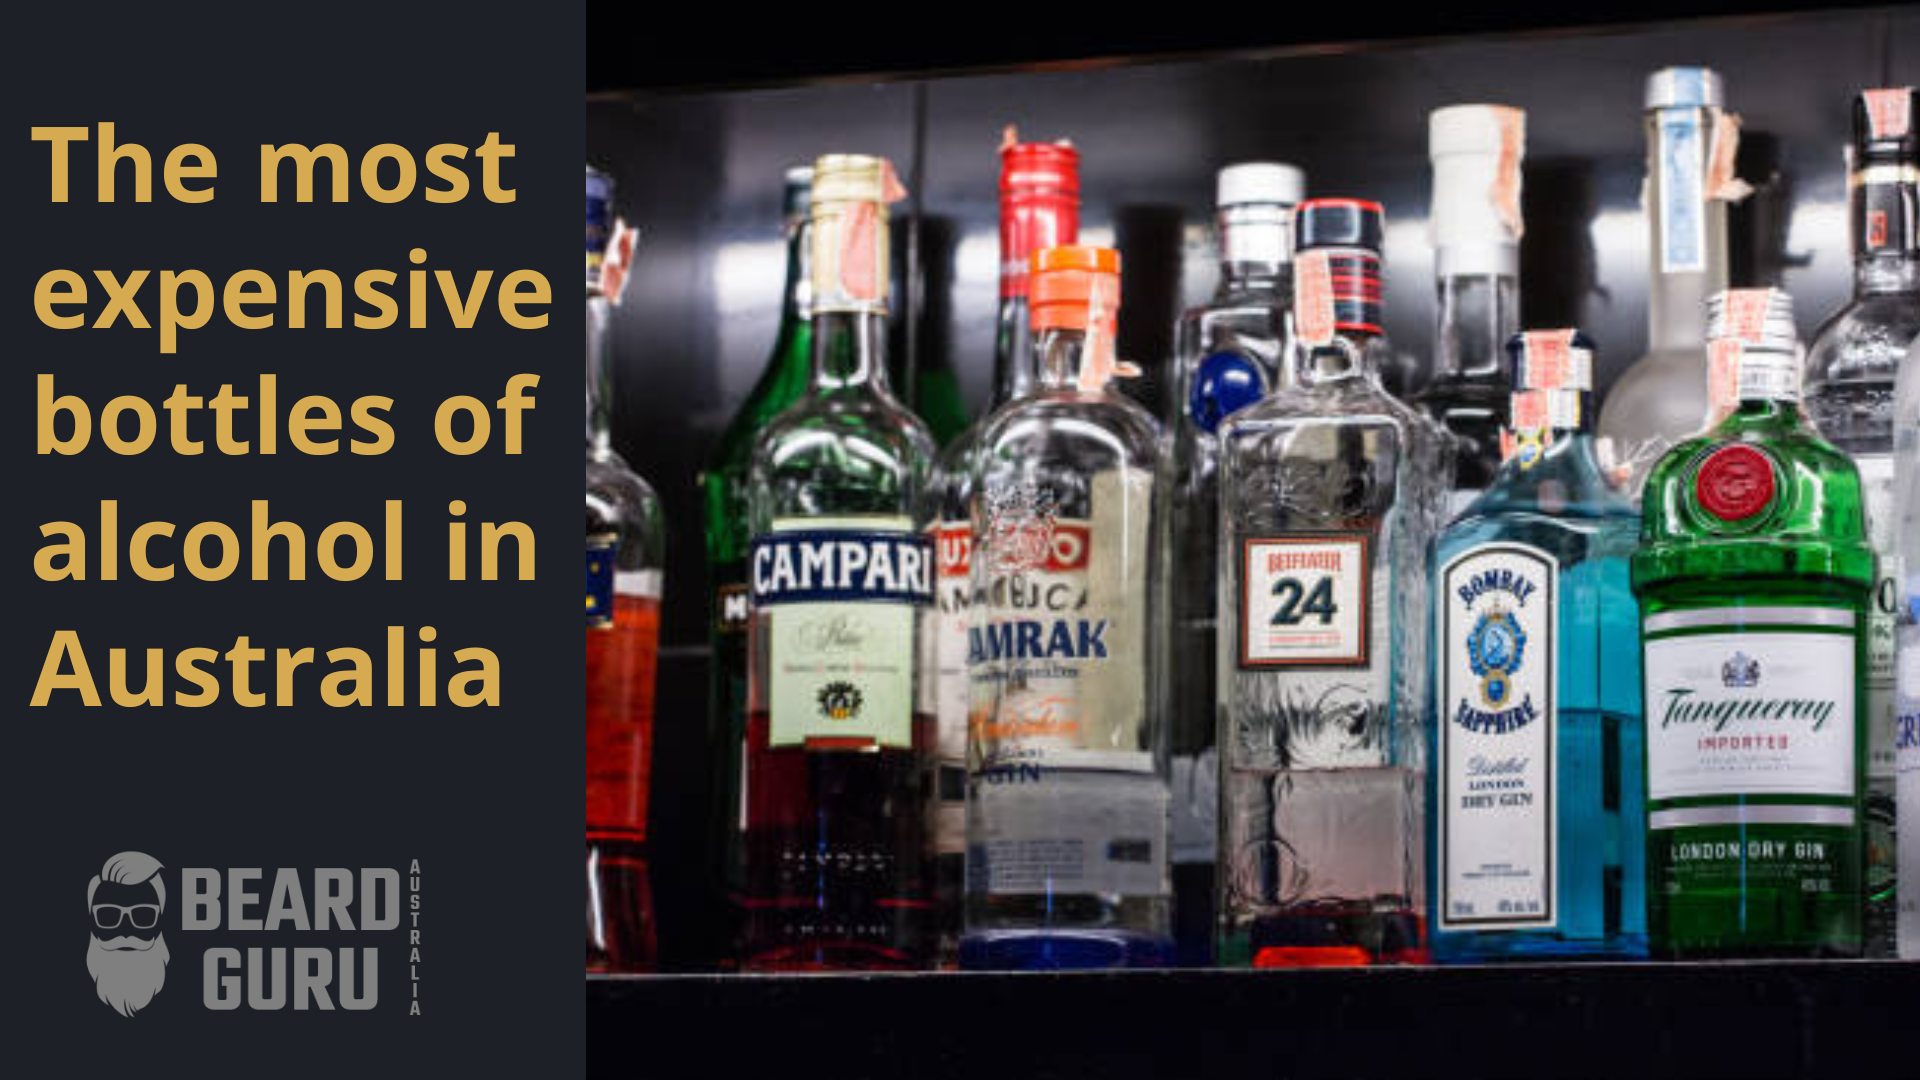 The most expensive bottles of alcohol in Australia